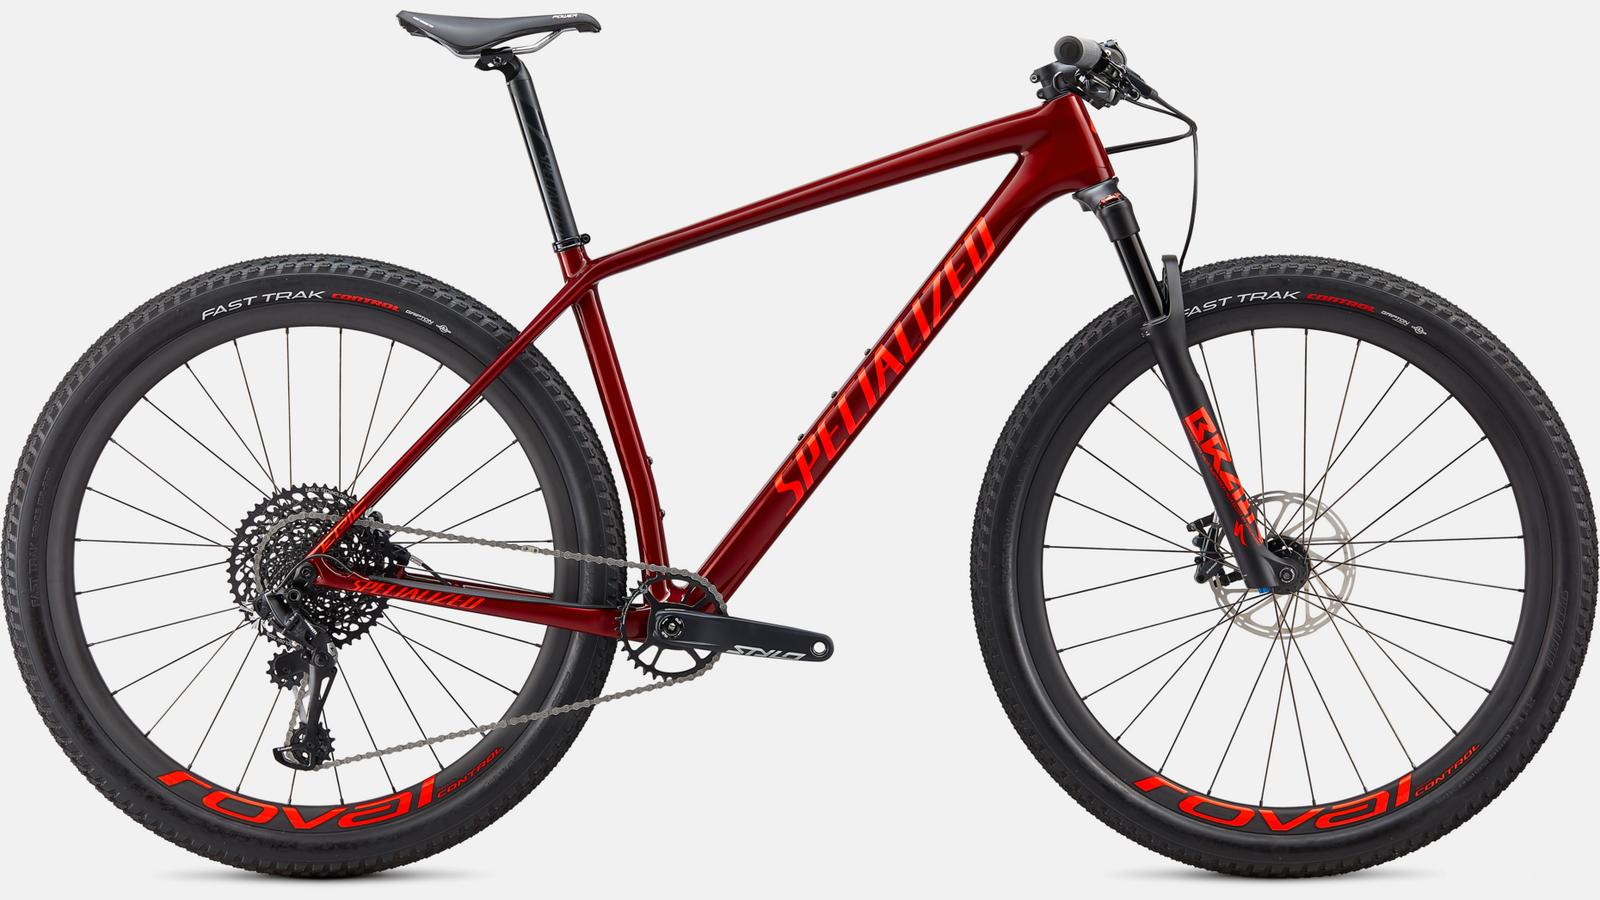 Paint for 2020 Specialized Epic Hardtail Expert - Gloss Metallic Crimson